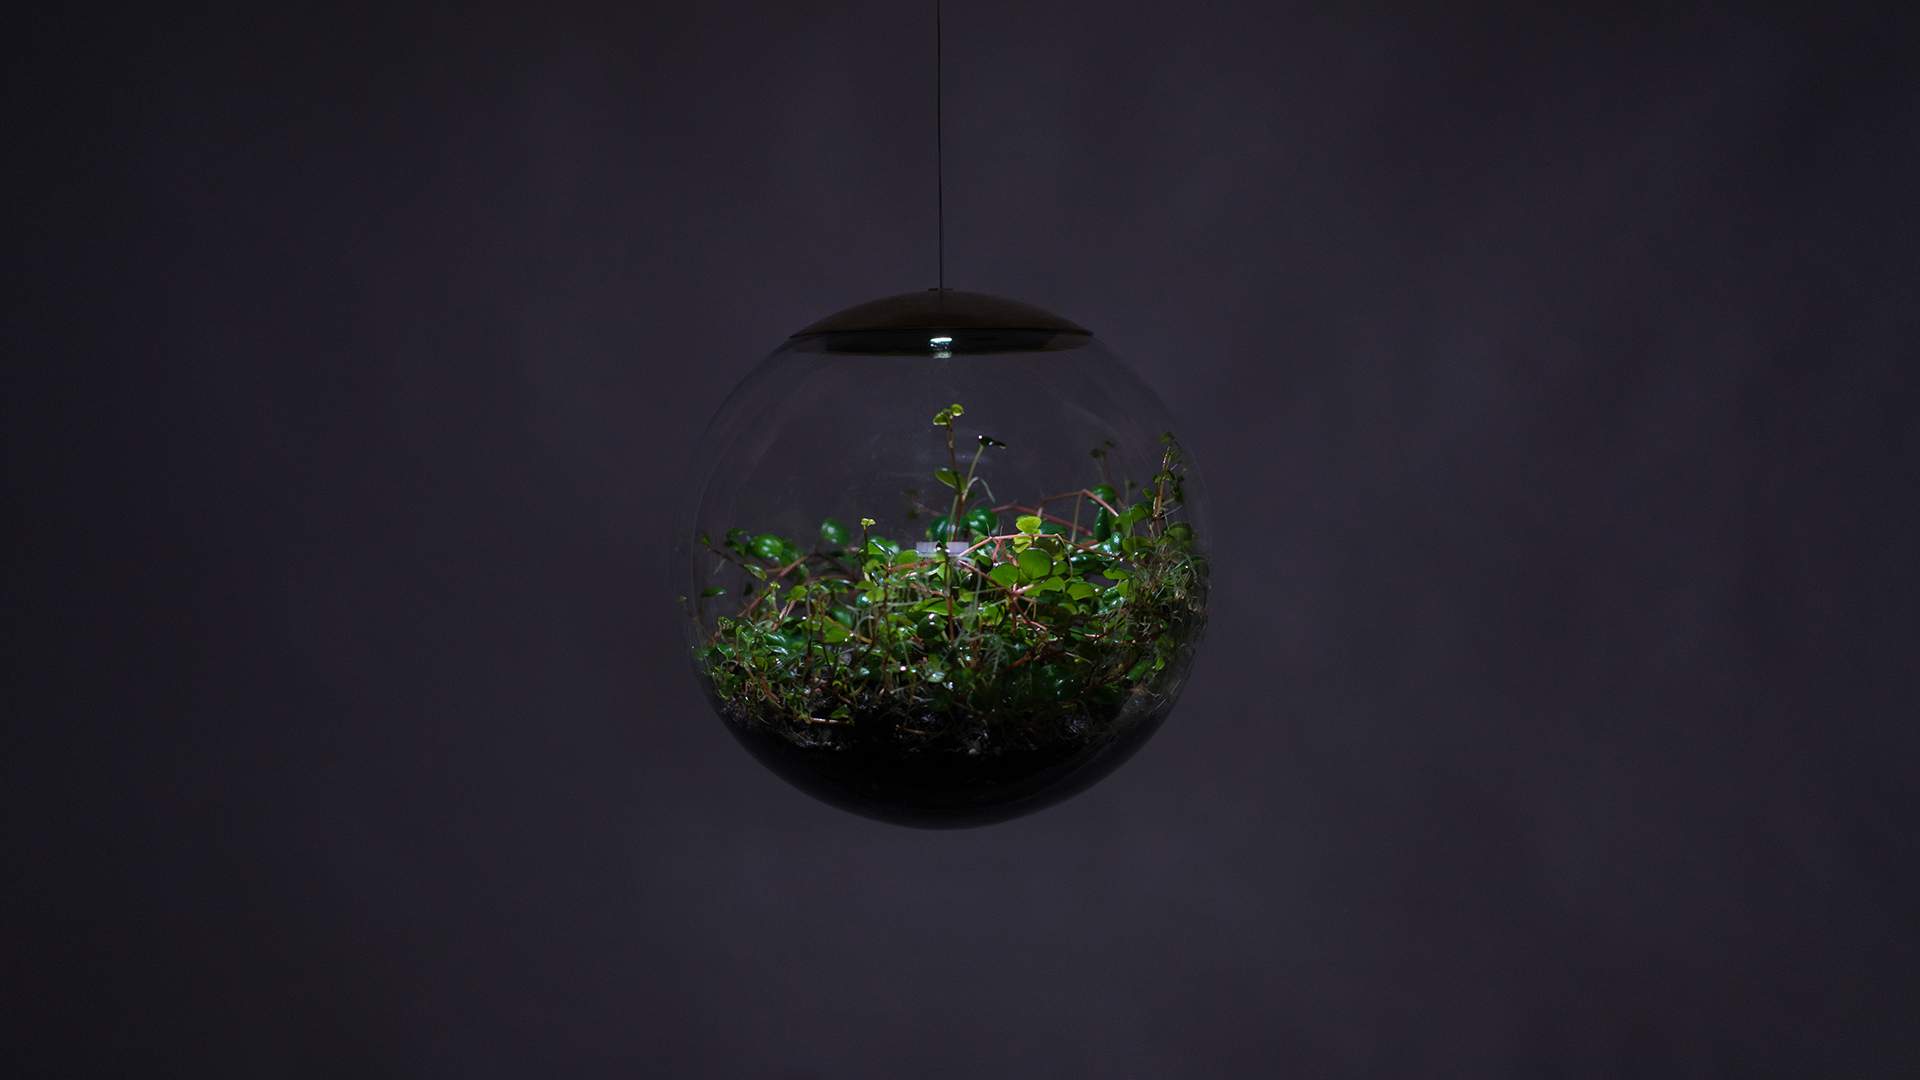 These Terrarium Lights Add a Mini Hanging Garden to Any Room